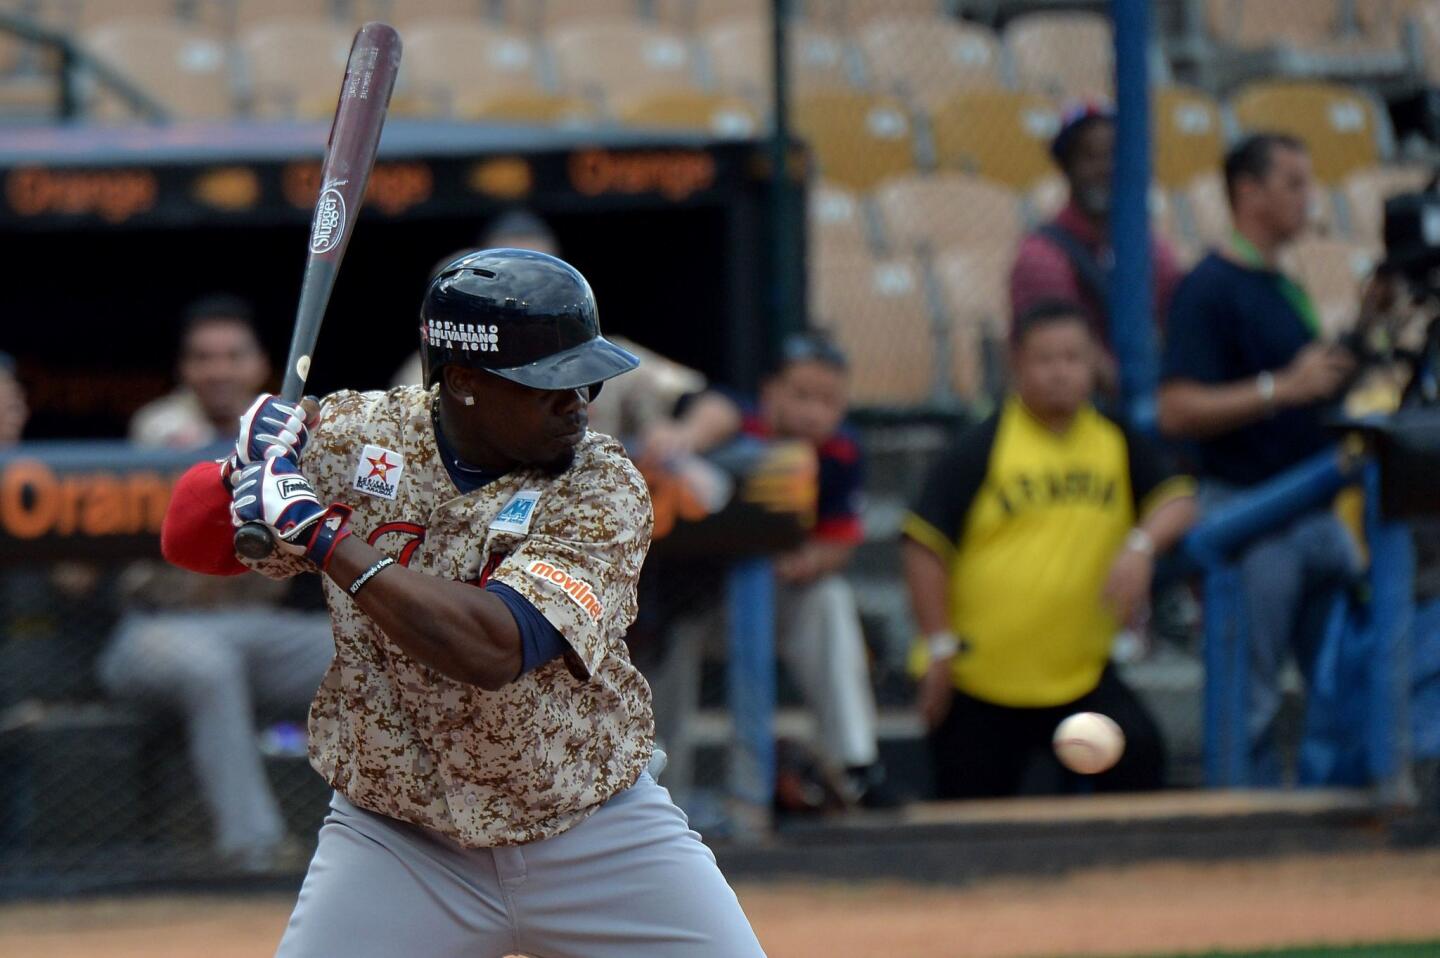 Adonis Garcia of Venezuela hits against Cuba during their 2016 Caribbean Baseball Series game in Santo Domingo, Dominican Republic, on February 4, 2016. AFP PHOTO/YAMIL LAGEYAMIL LAGE/AFP/Getty Images ** OUTS - ELSENT, FPG, CM - OUTS * NM, PH, VA if sourced by CT, LA or MoD **